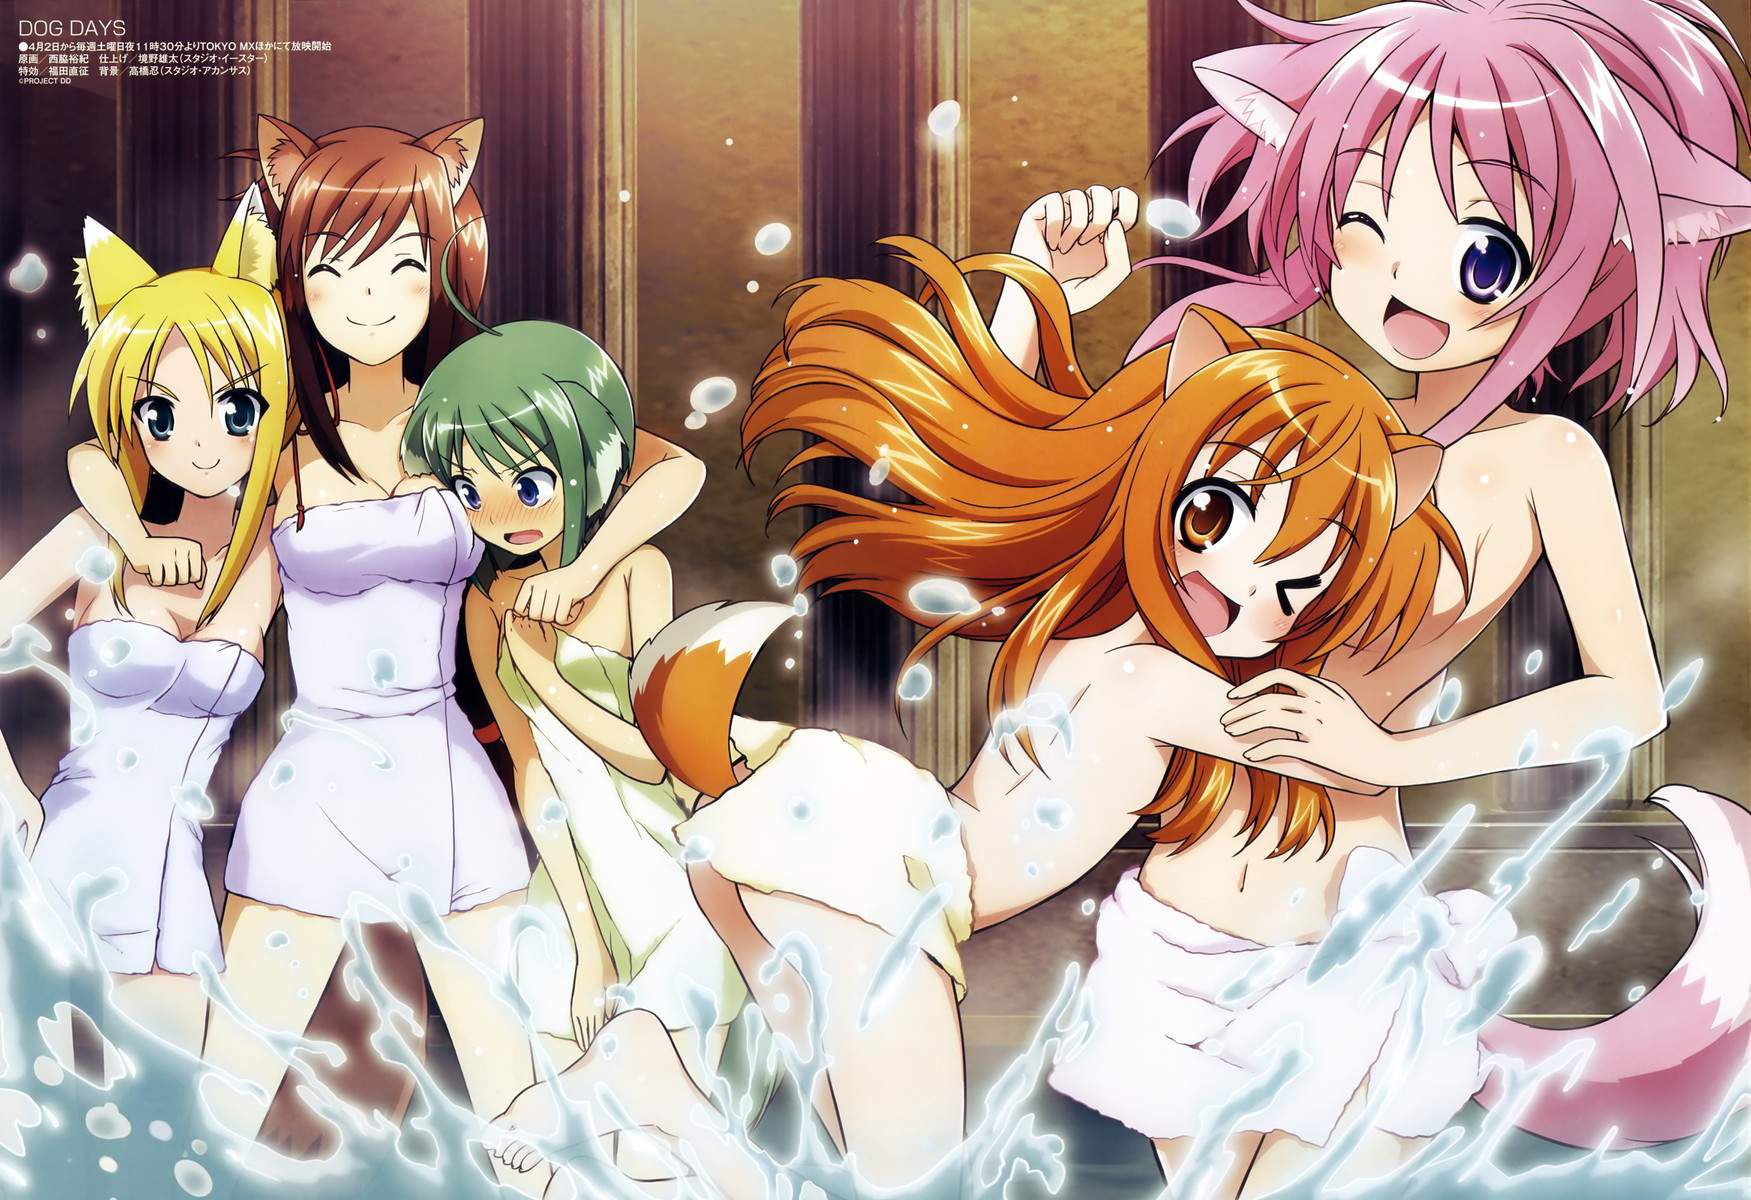 DOG DAYS millhiore F biscotti in one shot without you want 6